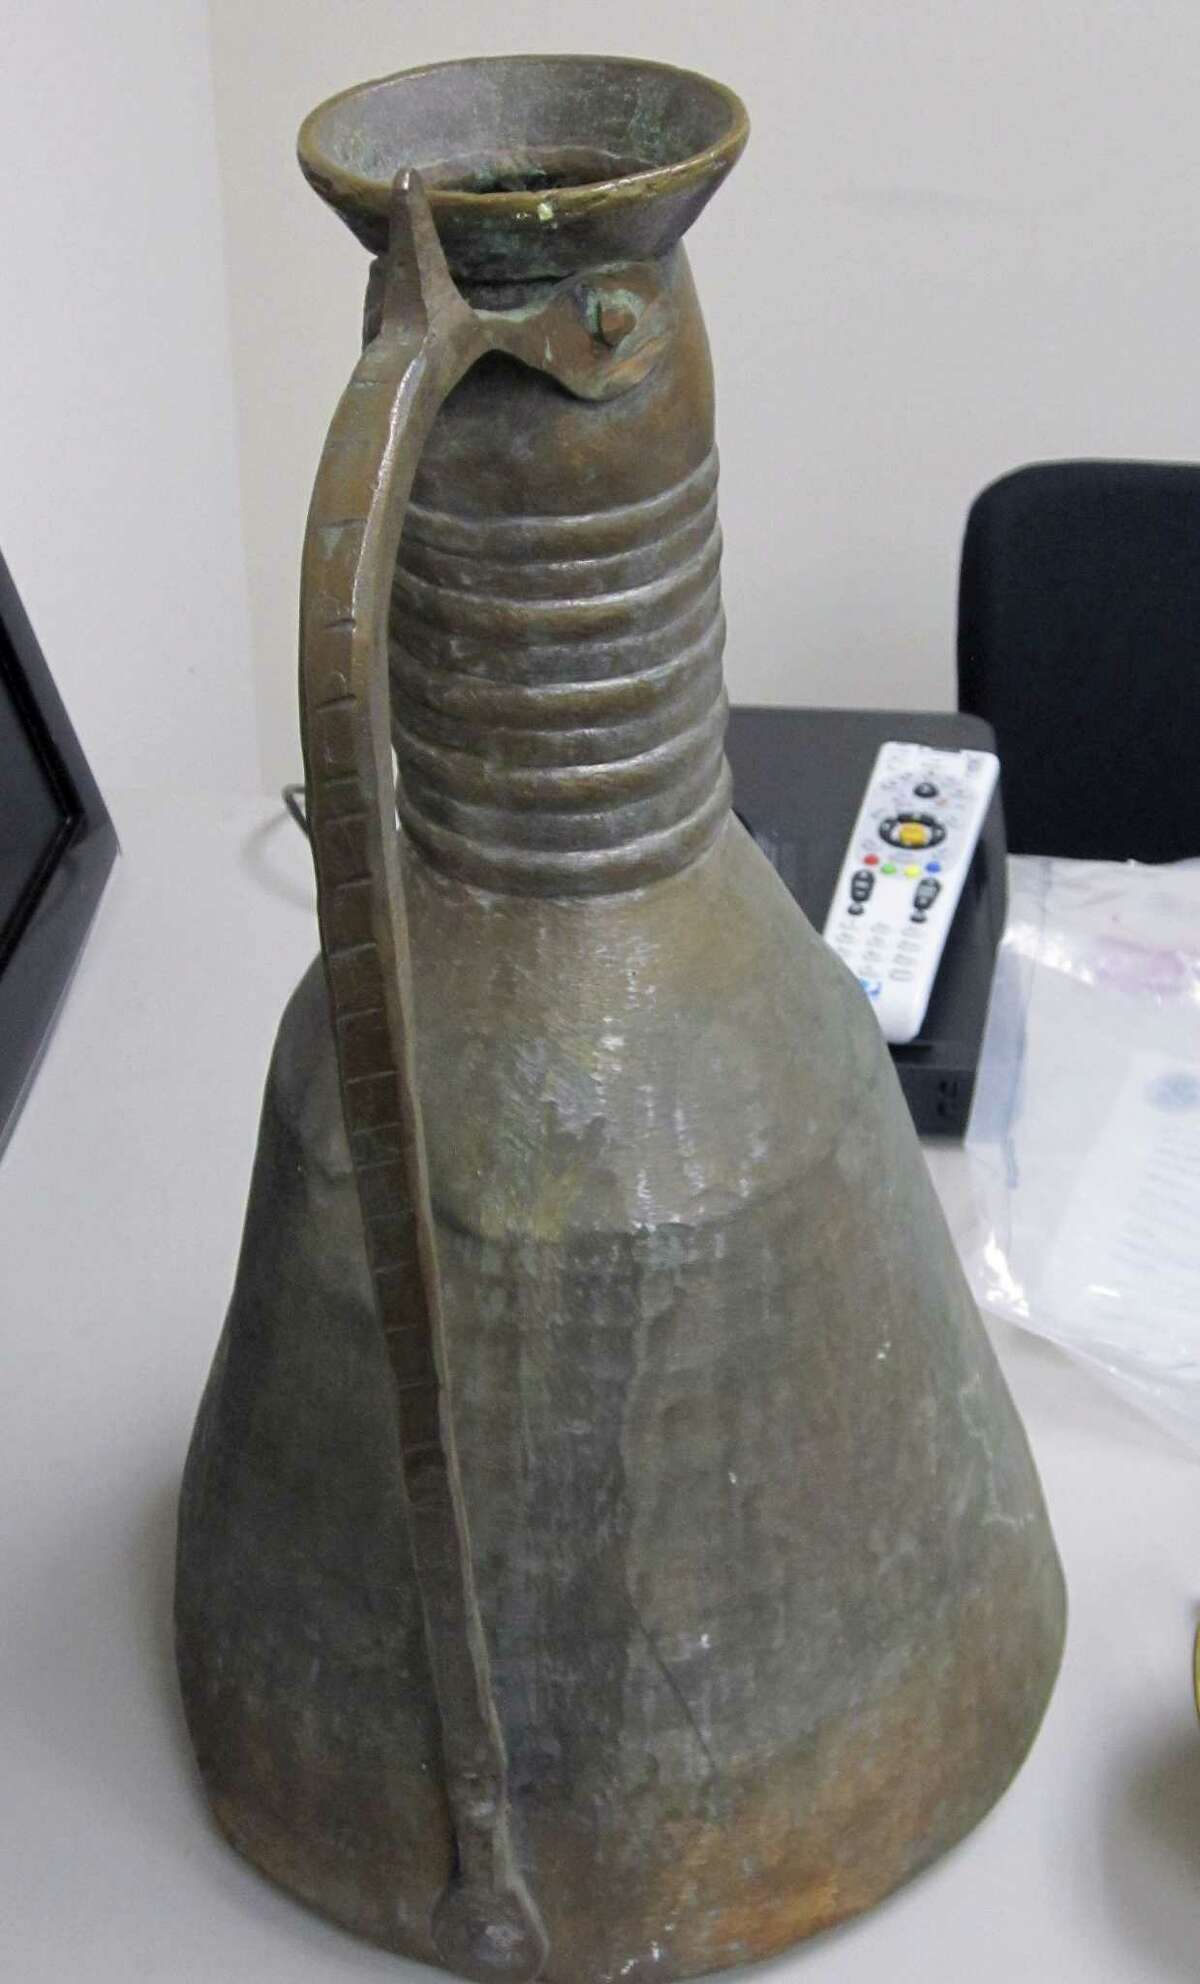 FILE - This undated file photo released by U.S. Immigration and Customs Enforcement shows a water urn, one of many items looted from Saddam Husseinís palaces, that were recovered by federal investigators and formally repatriated to Iraq in a March 16, 2015, ceremony at the Iraqi consulate in Washington. Officials traced the urn to an American defense contractor who worked in Iraq and who acknowledged taking it. Laws prohibit the export and sale of antiquities that belong to foreign governments. The case was presented to federal prosecutors in Connecticut but they declined to file charges. (AP Photo/U.S. Immigration and Customs Enforcement, File)